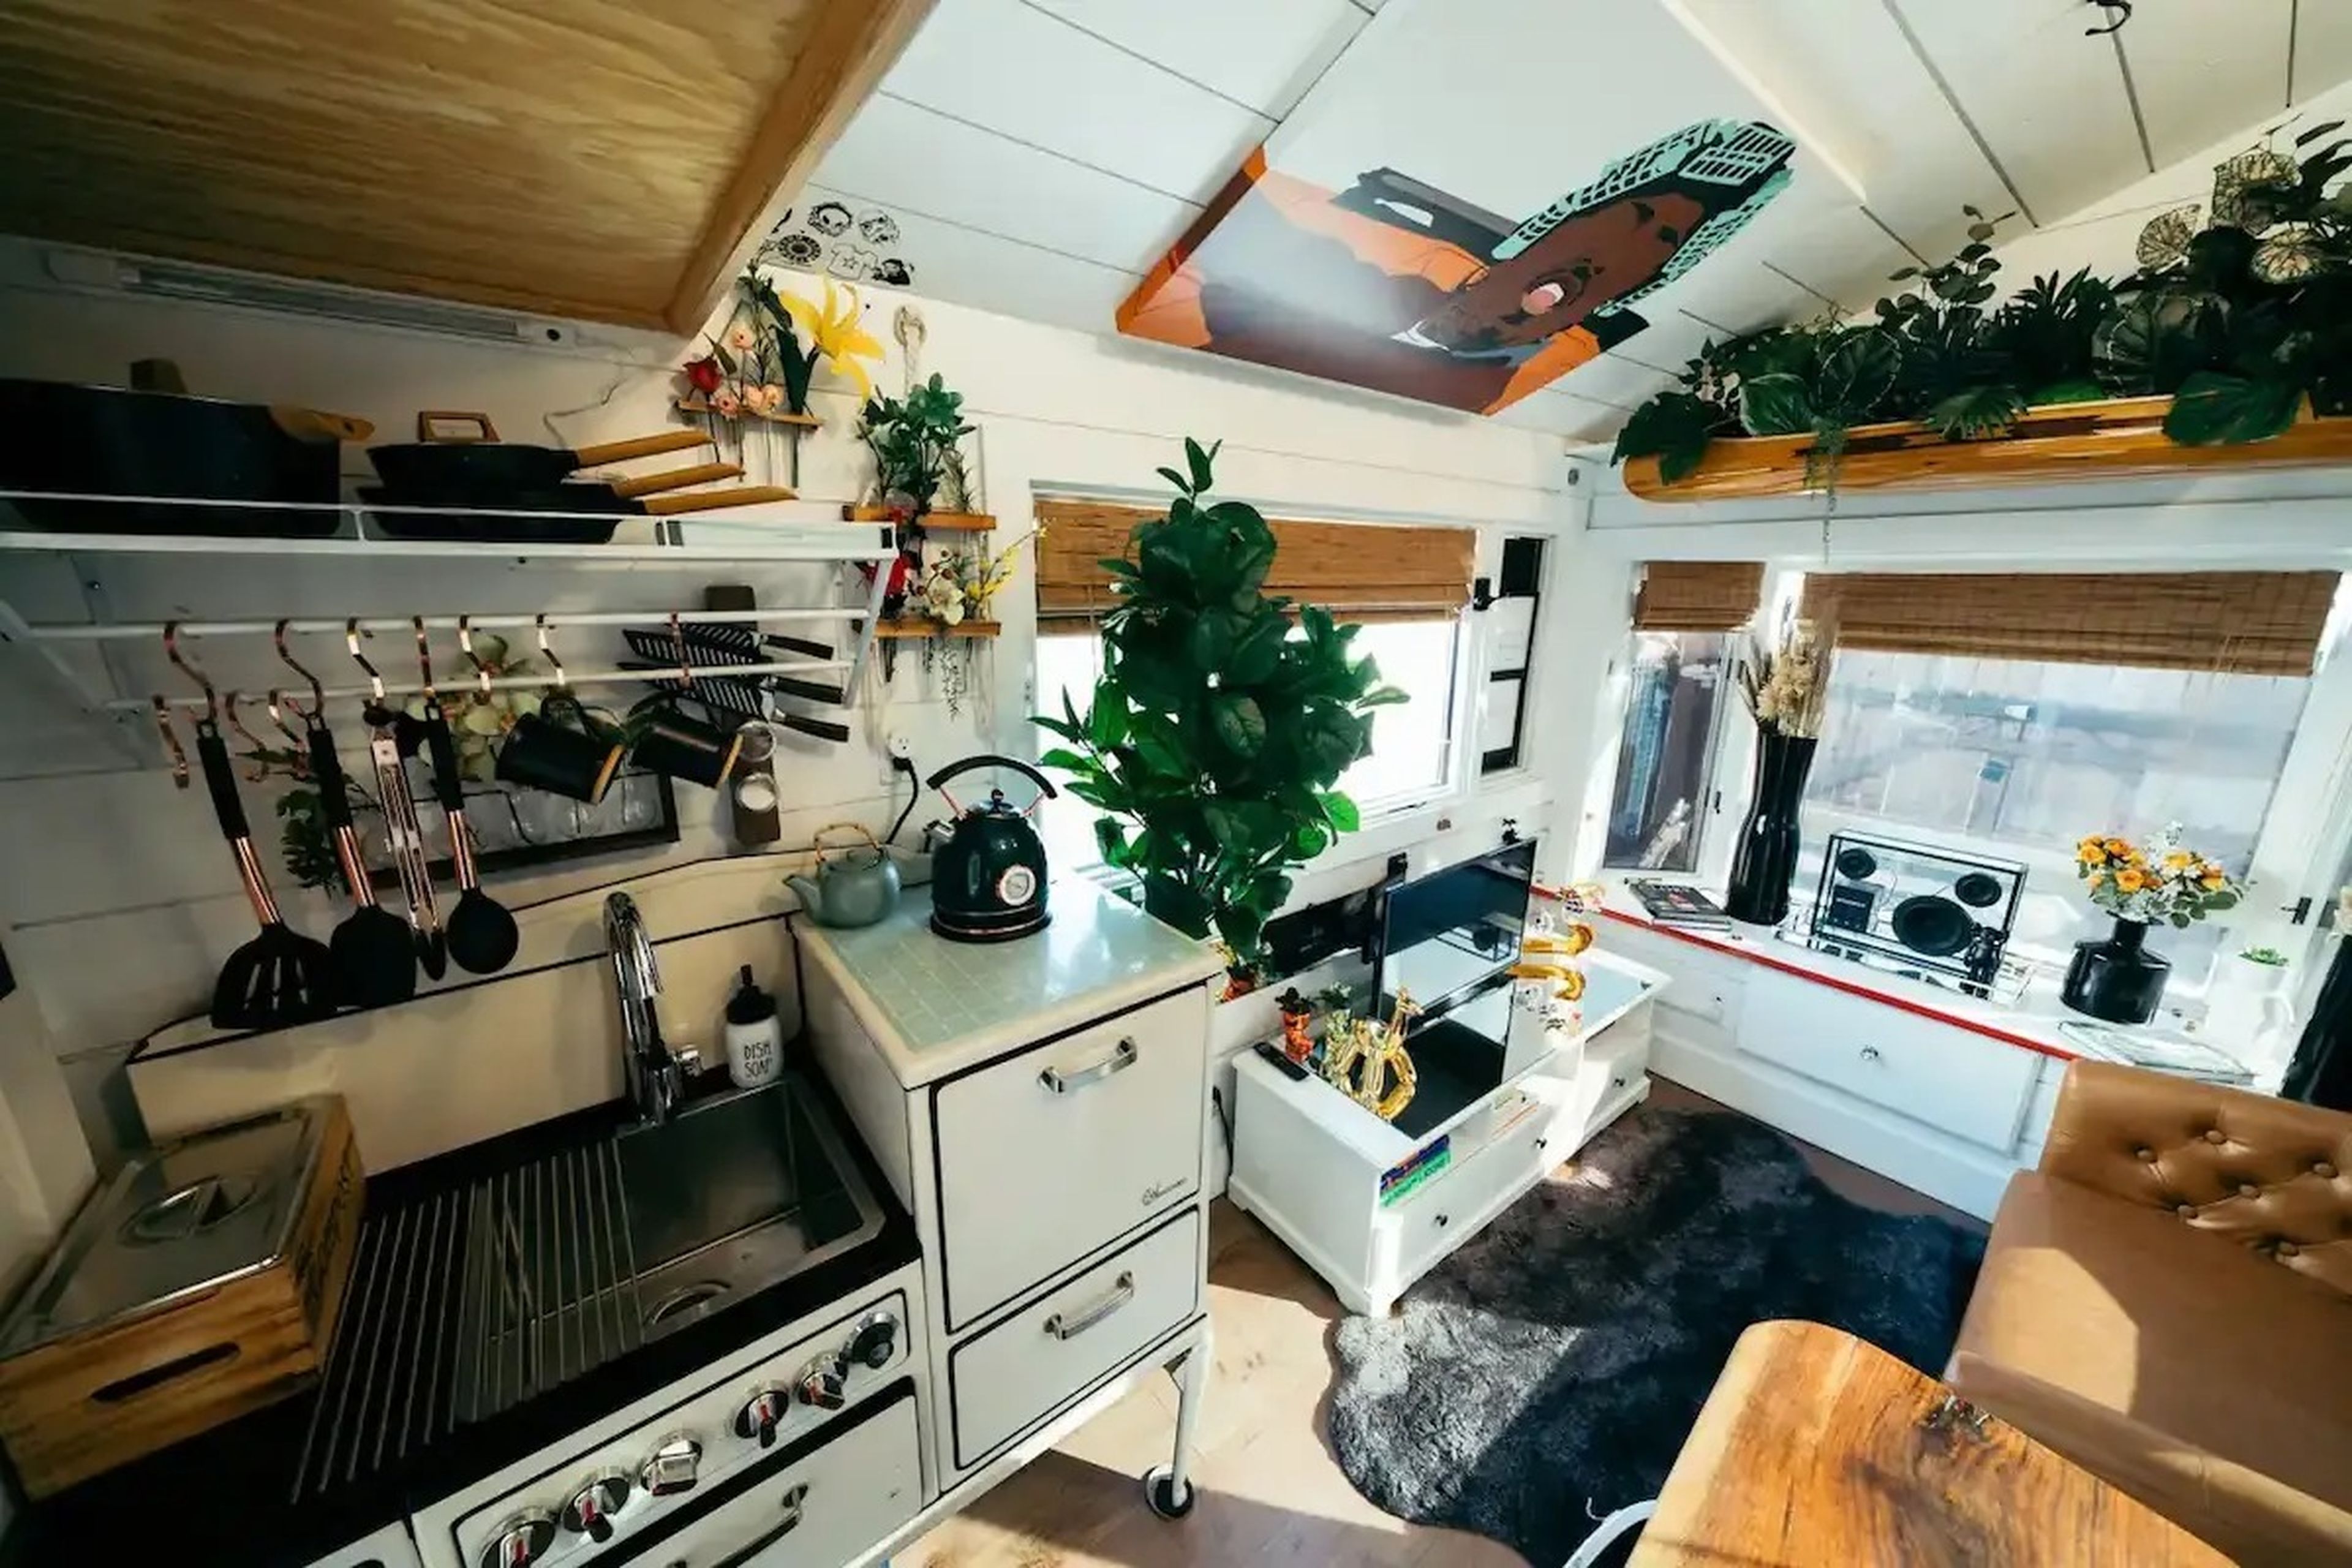 The kitchen space in Ansel Troy's Airbnb with cooking utensils on a rack and a living space off to the side.